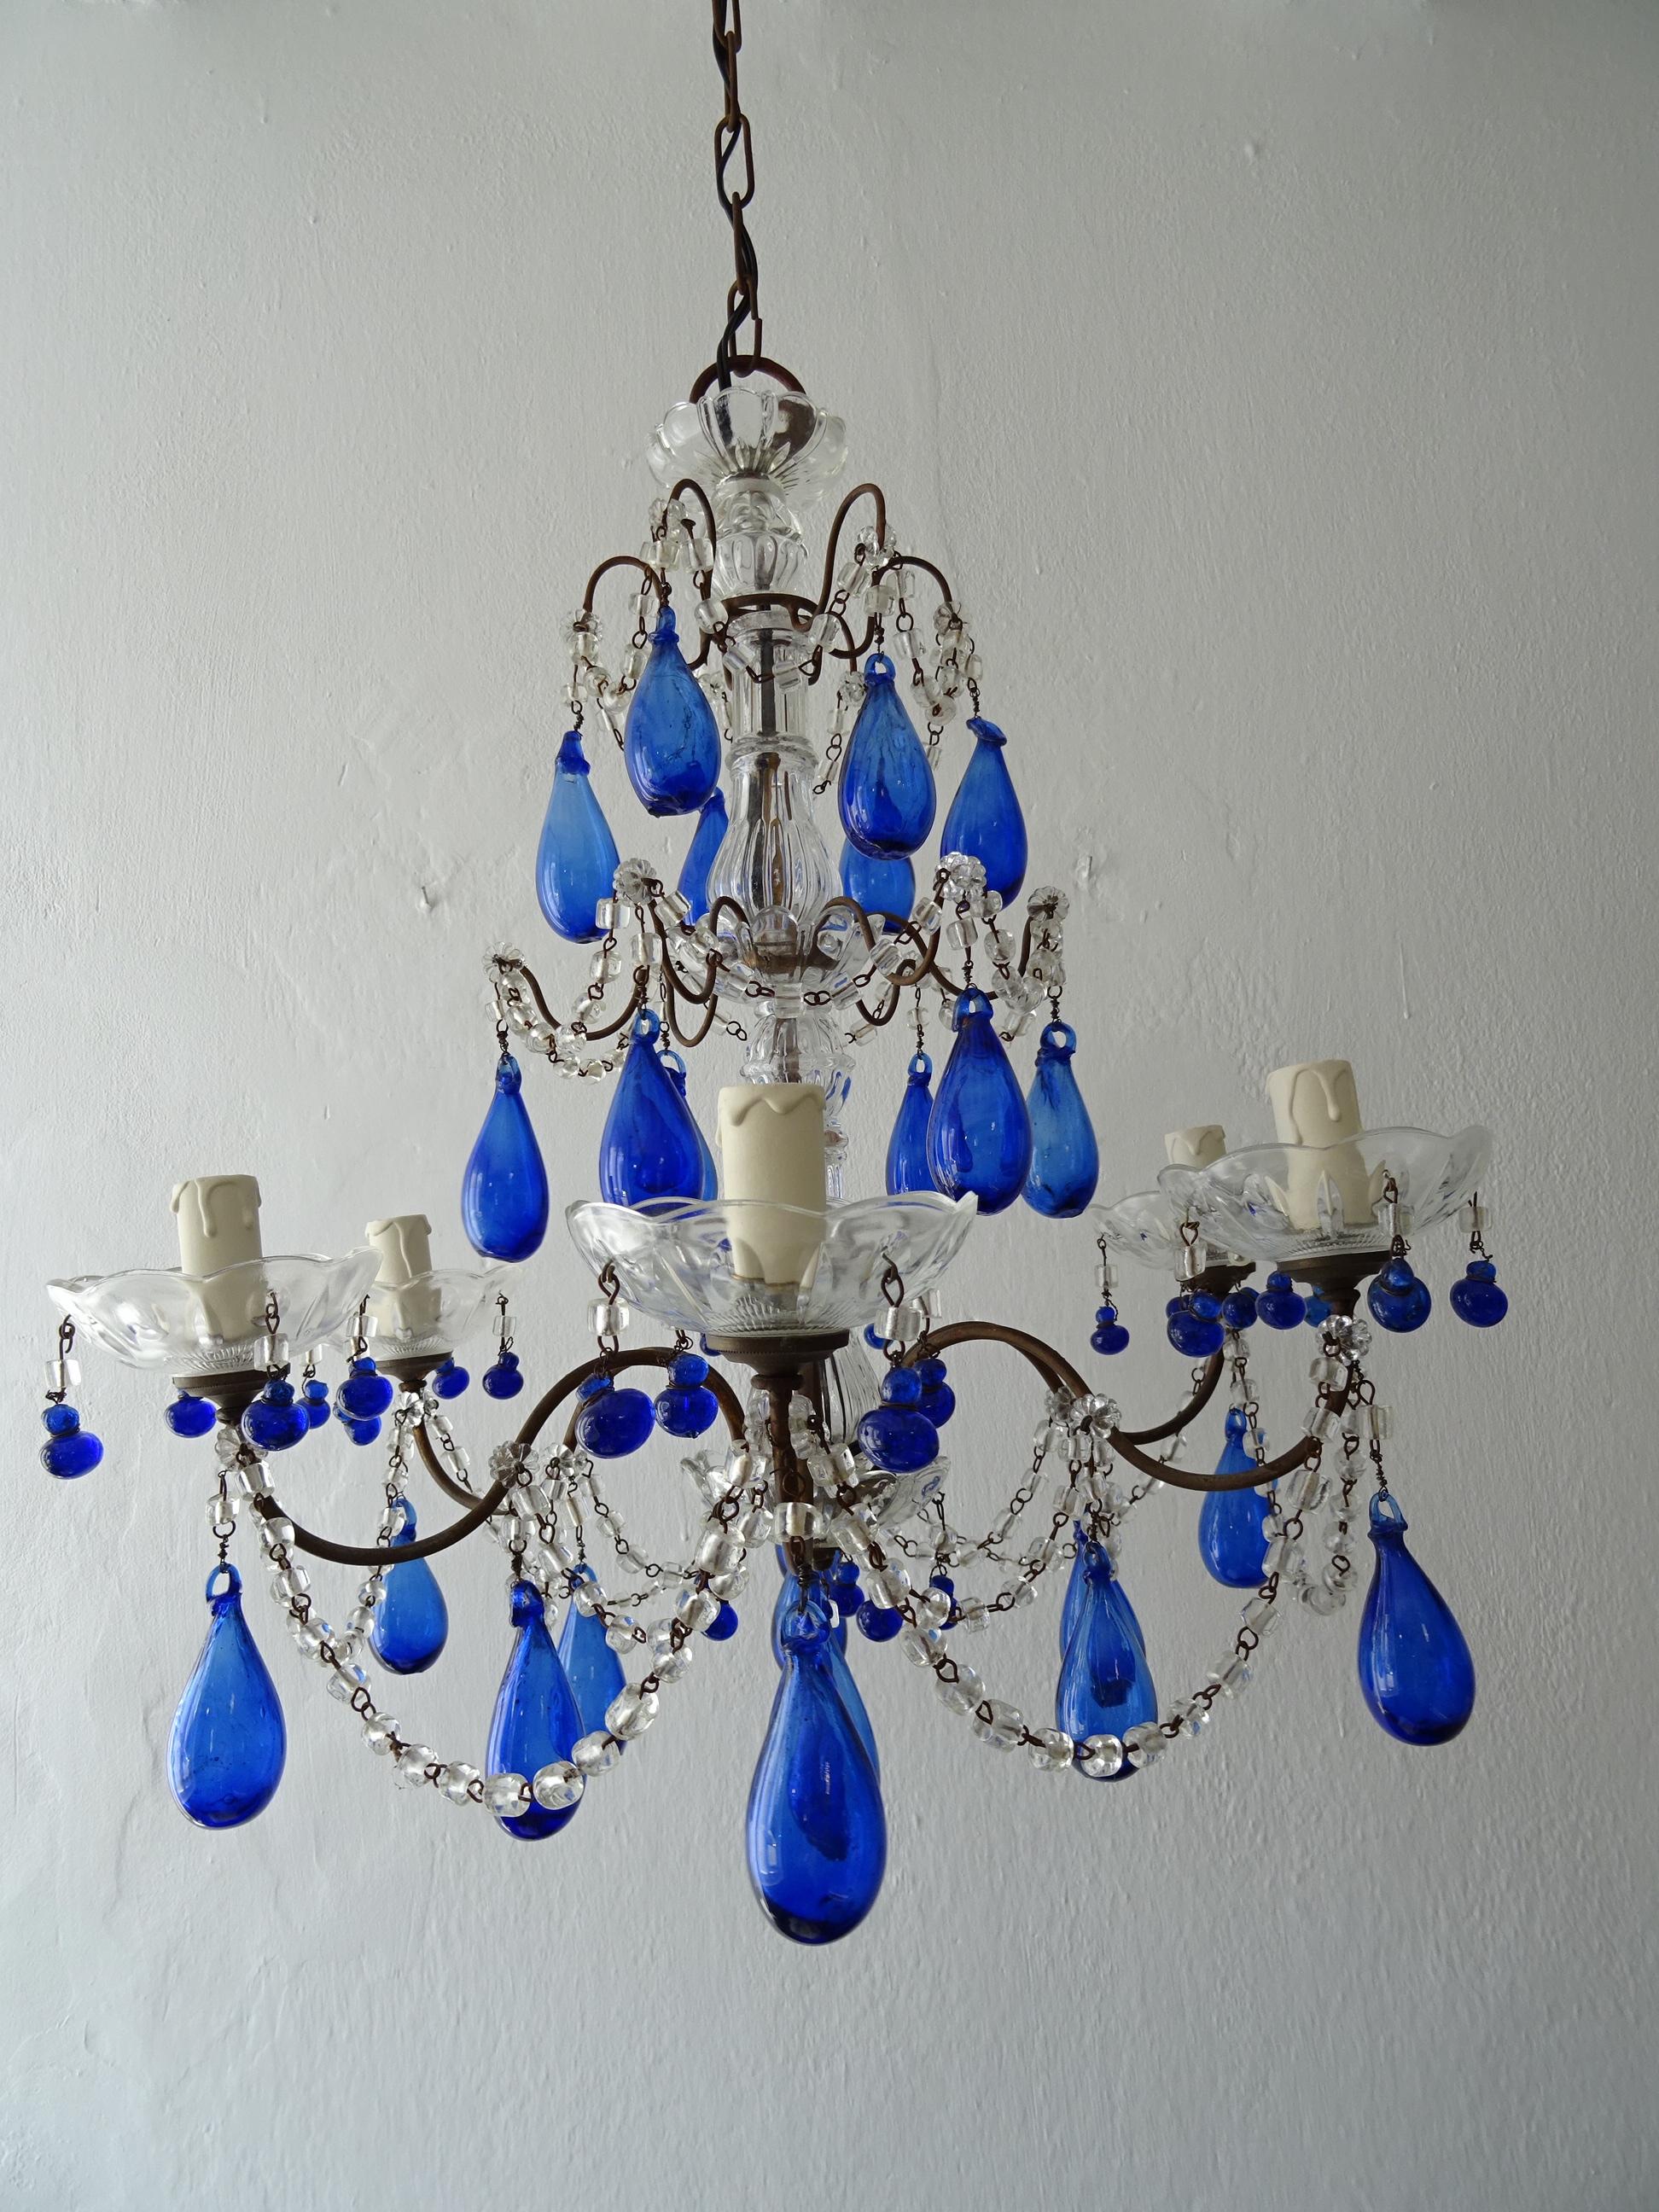 Housing 6 lights, sitting in crystal bobeches, dripping with vintage cobalt Murano glass tiny drops. This chandelier will be rewired with certified UL US sockets for the United States and appropriate sockets for all other countries and ready to